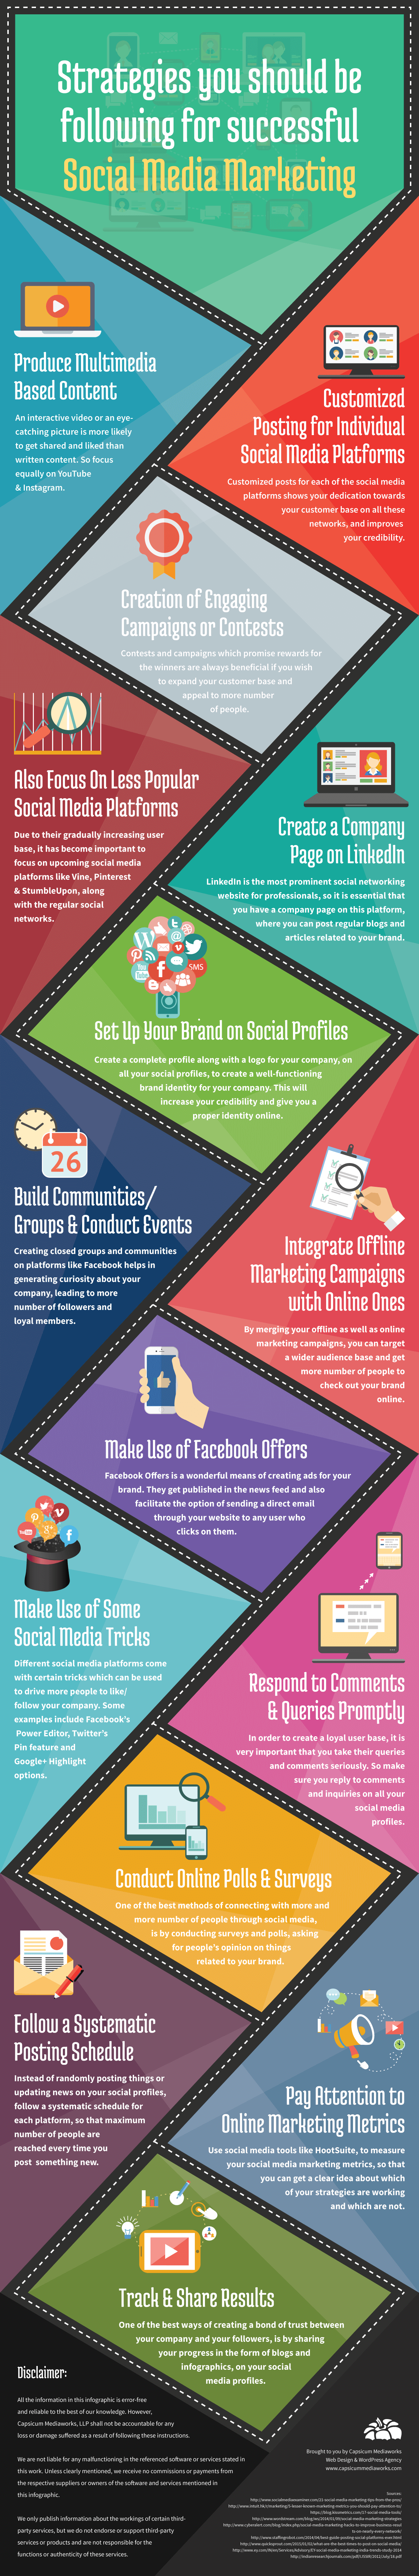 Benefits of Social Media Marketing for your small business : Infographics